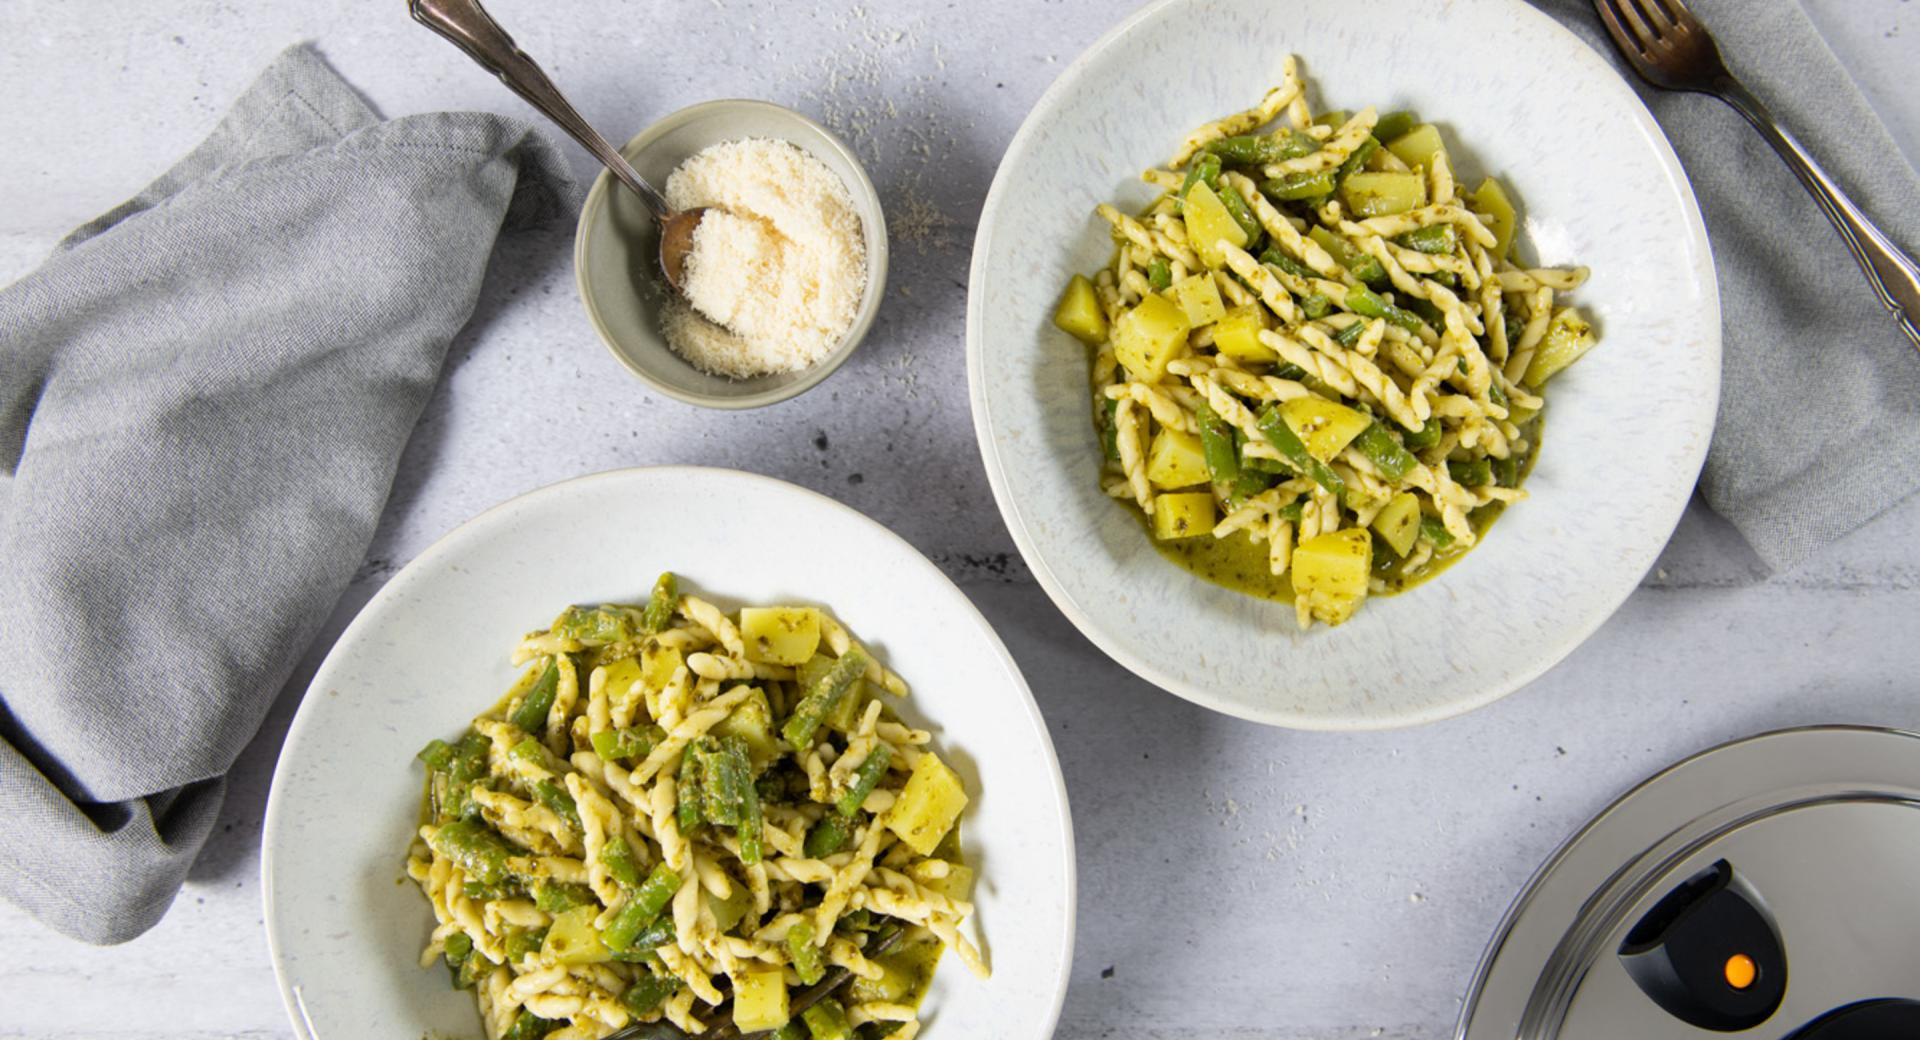 Trofie with pesto and vegetables